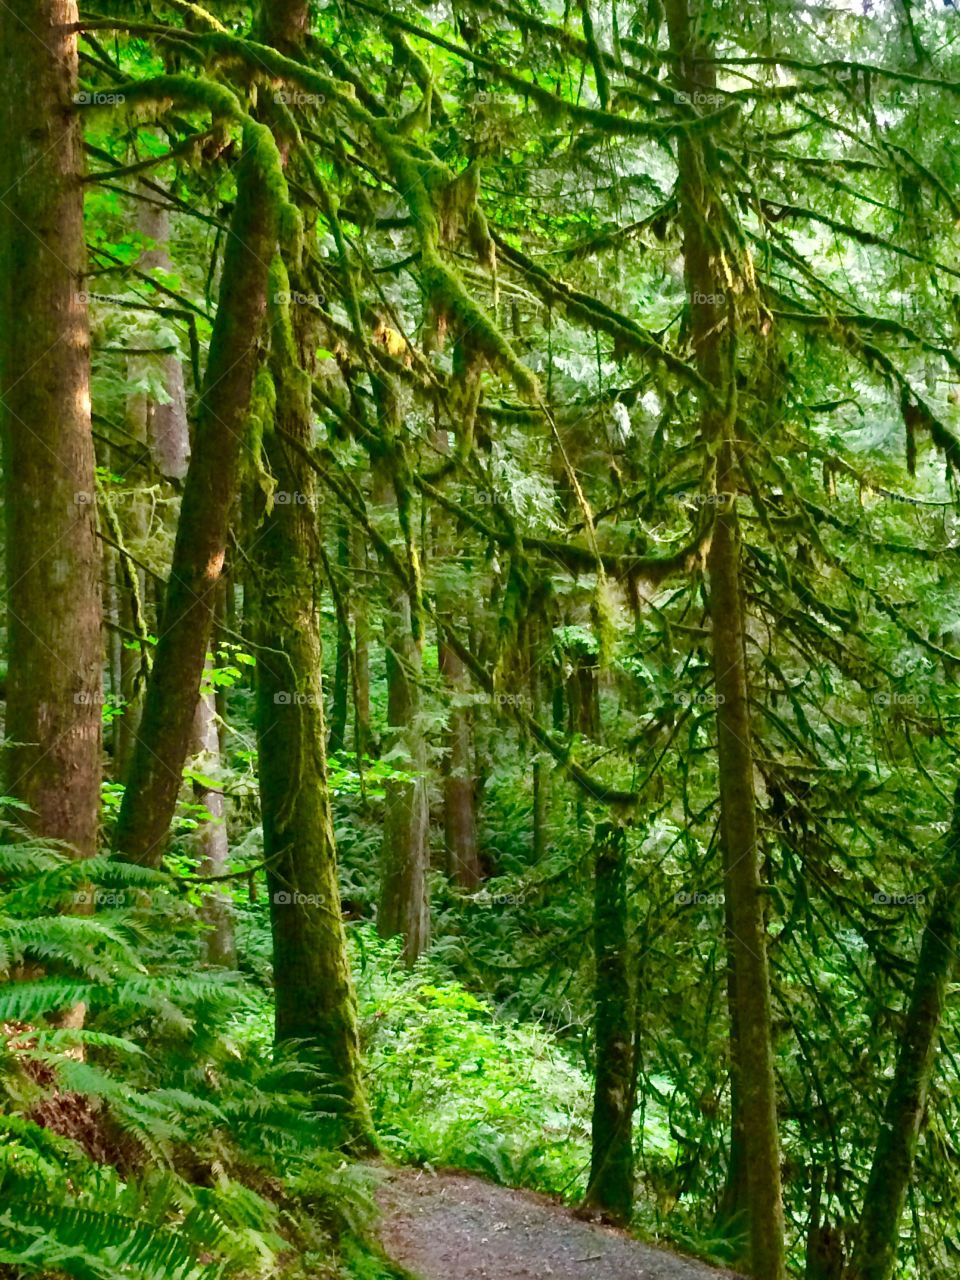 Moss-covered trees in rainforest